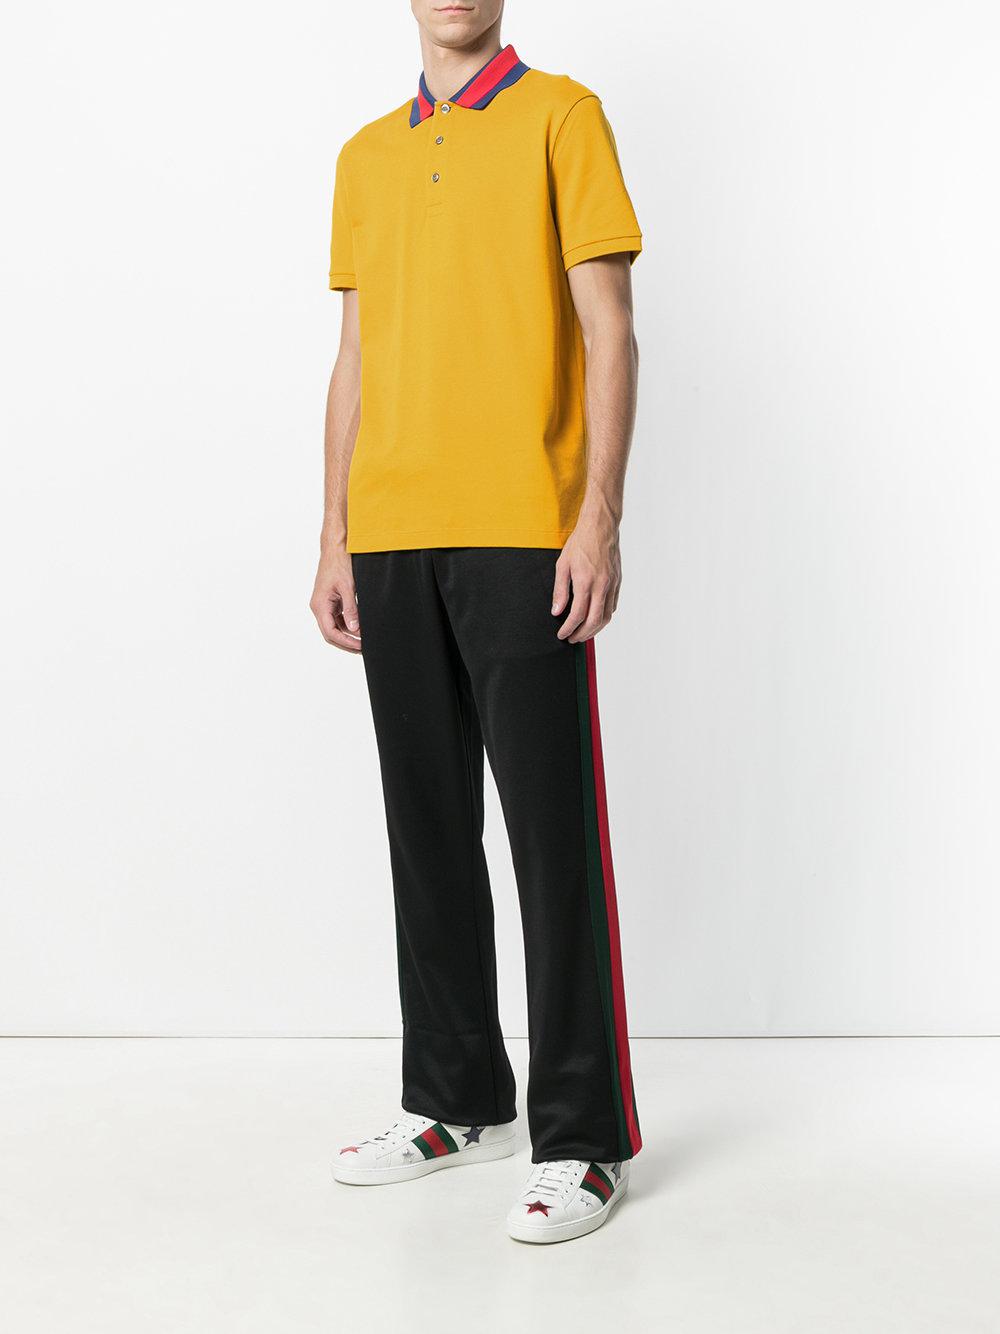 Lyst - Gucci Polo Shirt With Wolf Appliqué in Yellow for Men